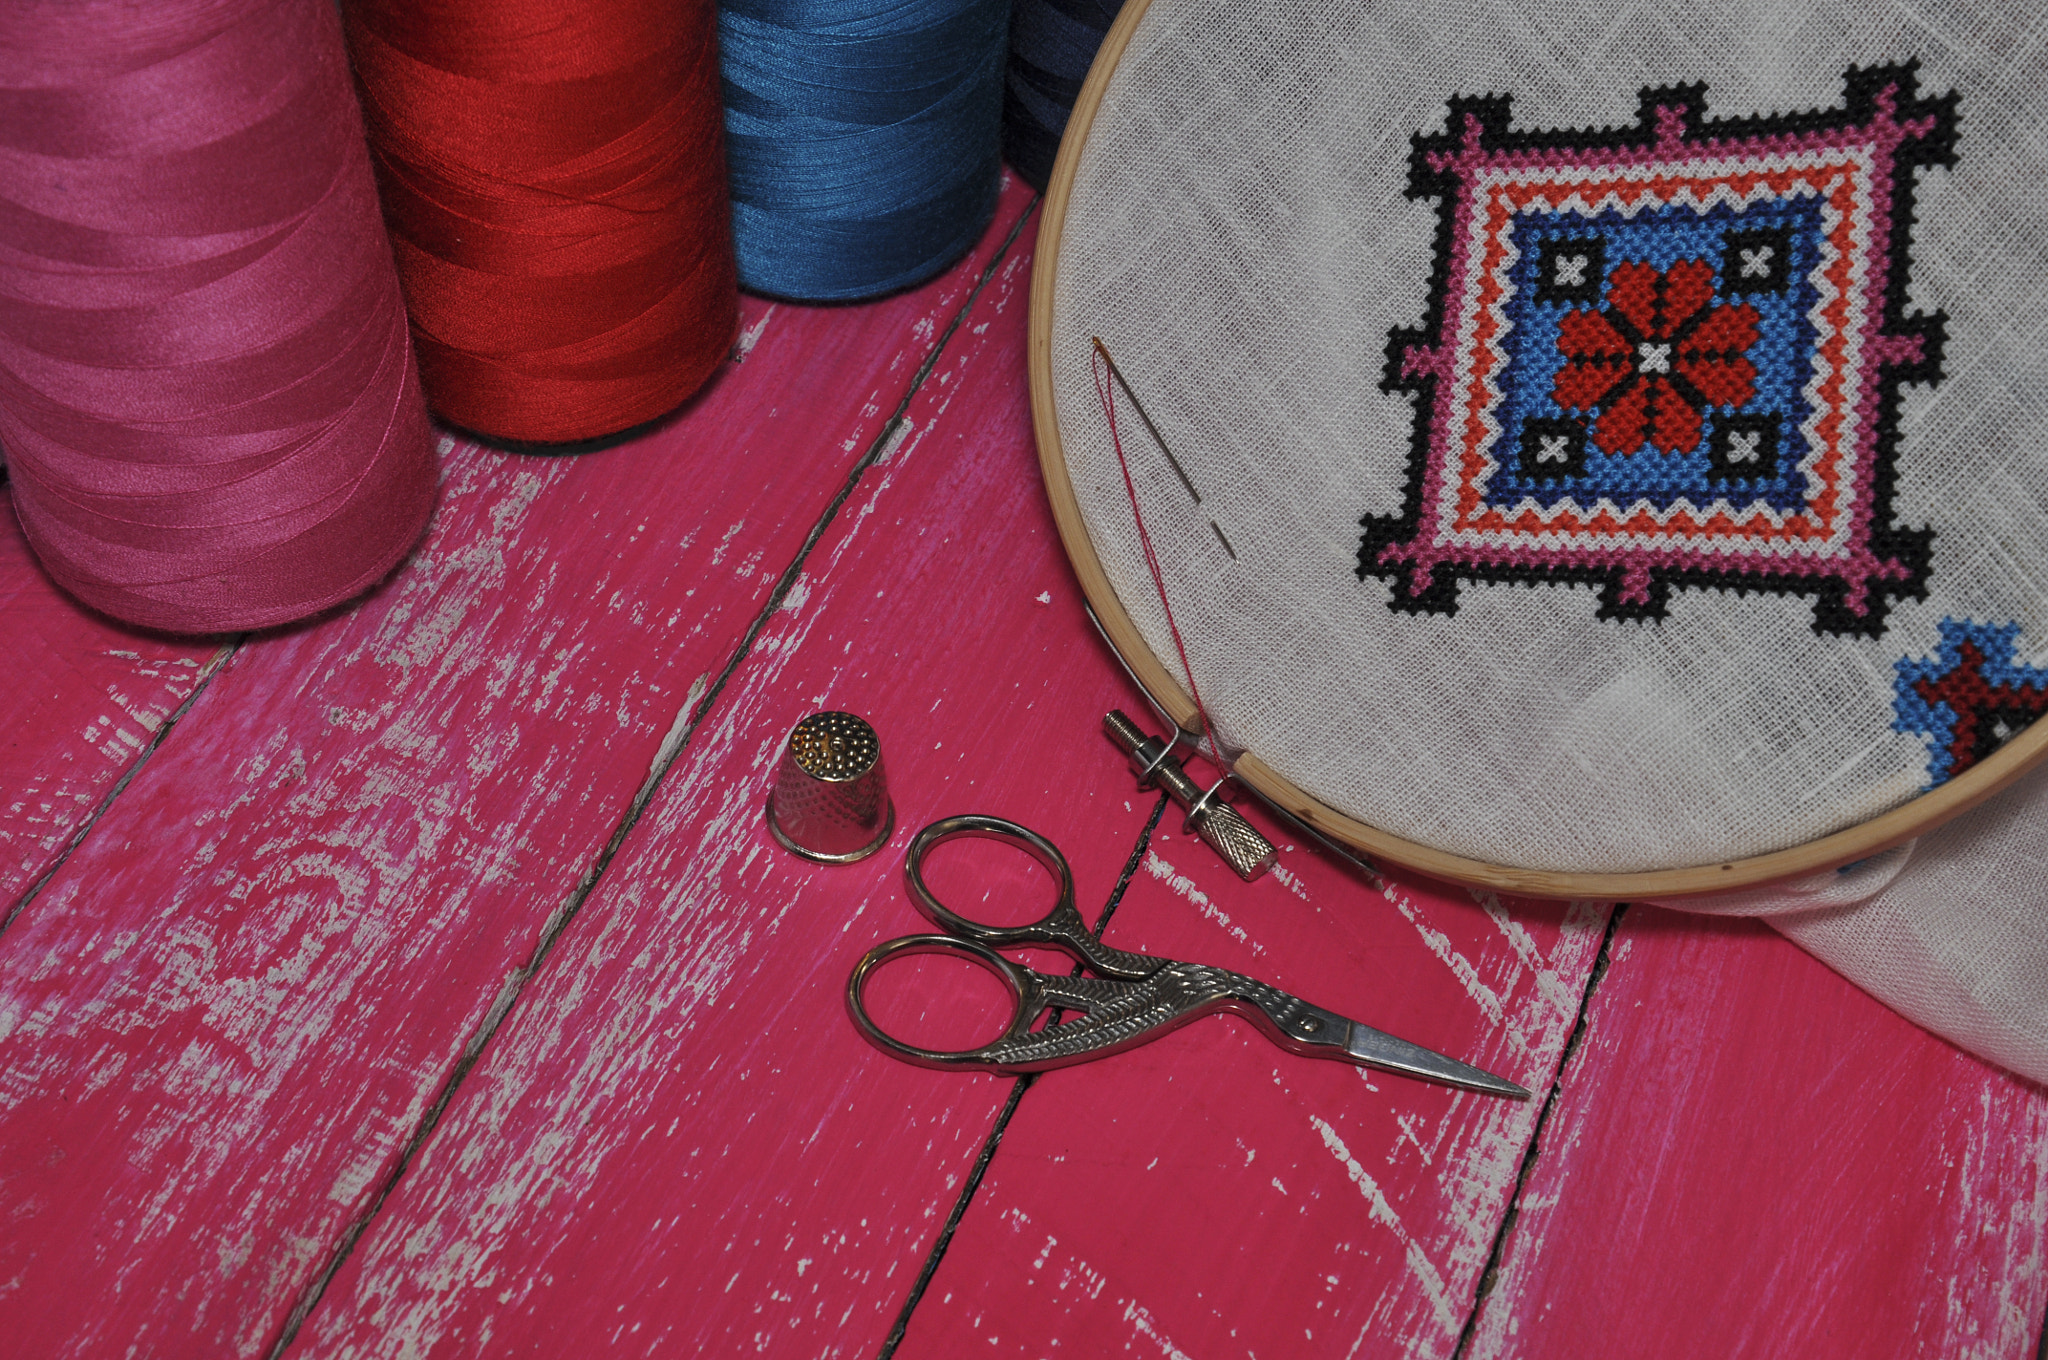 Nikon D90 sample photo. Geometry embroidery pattern in the wooden hoop photography